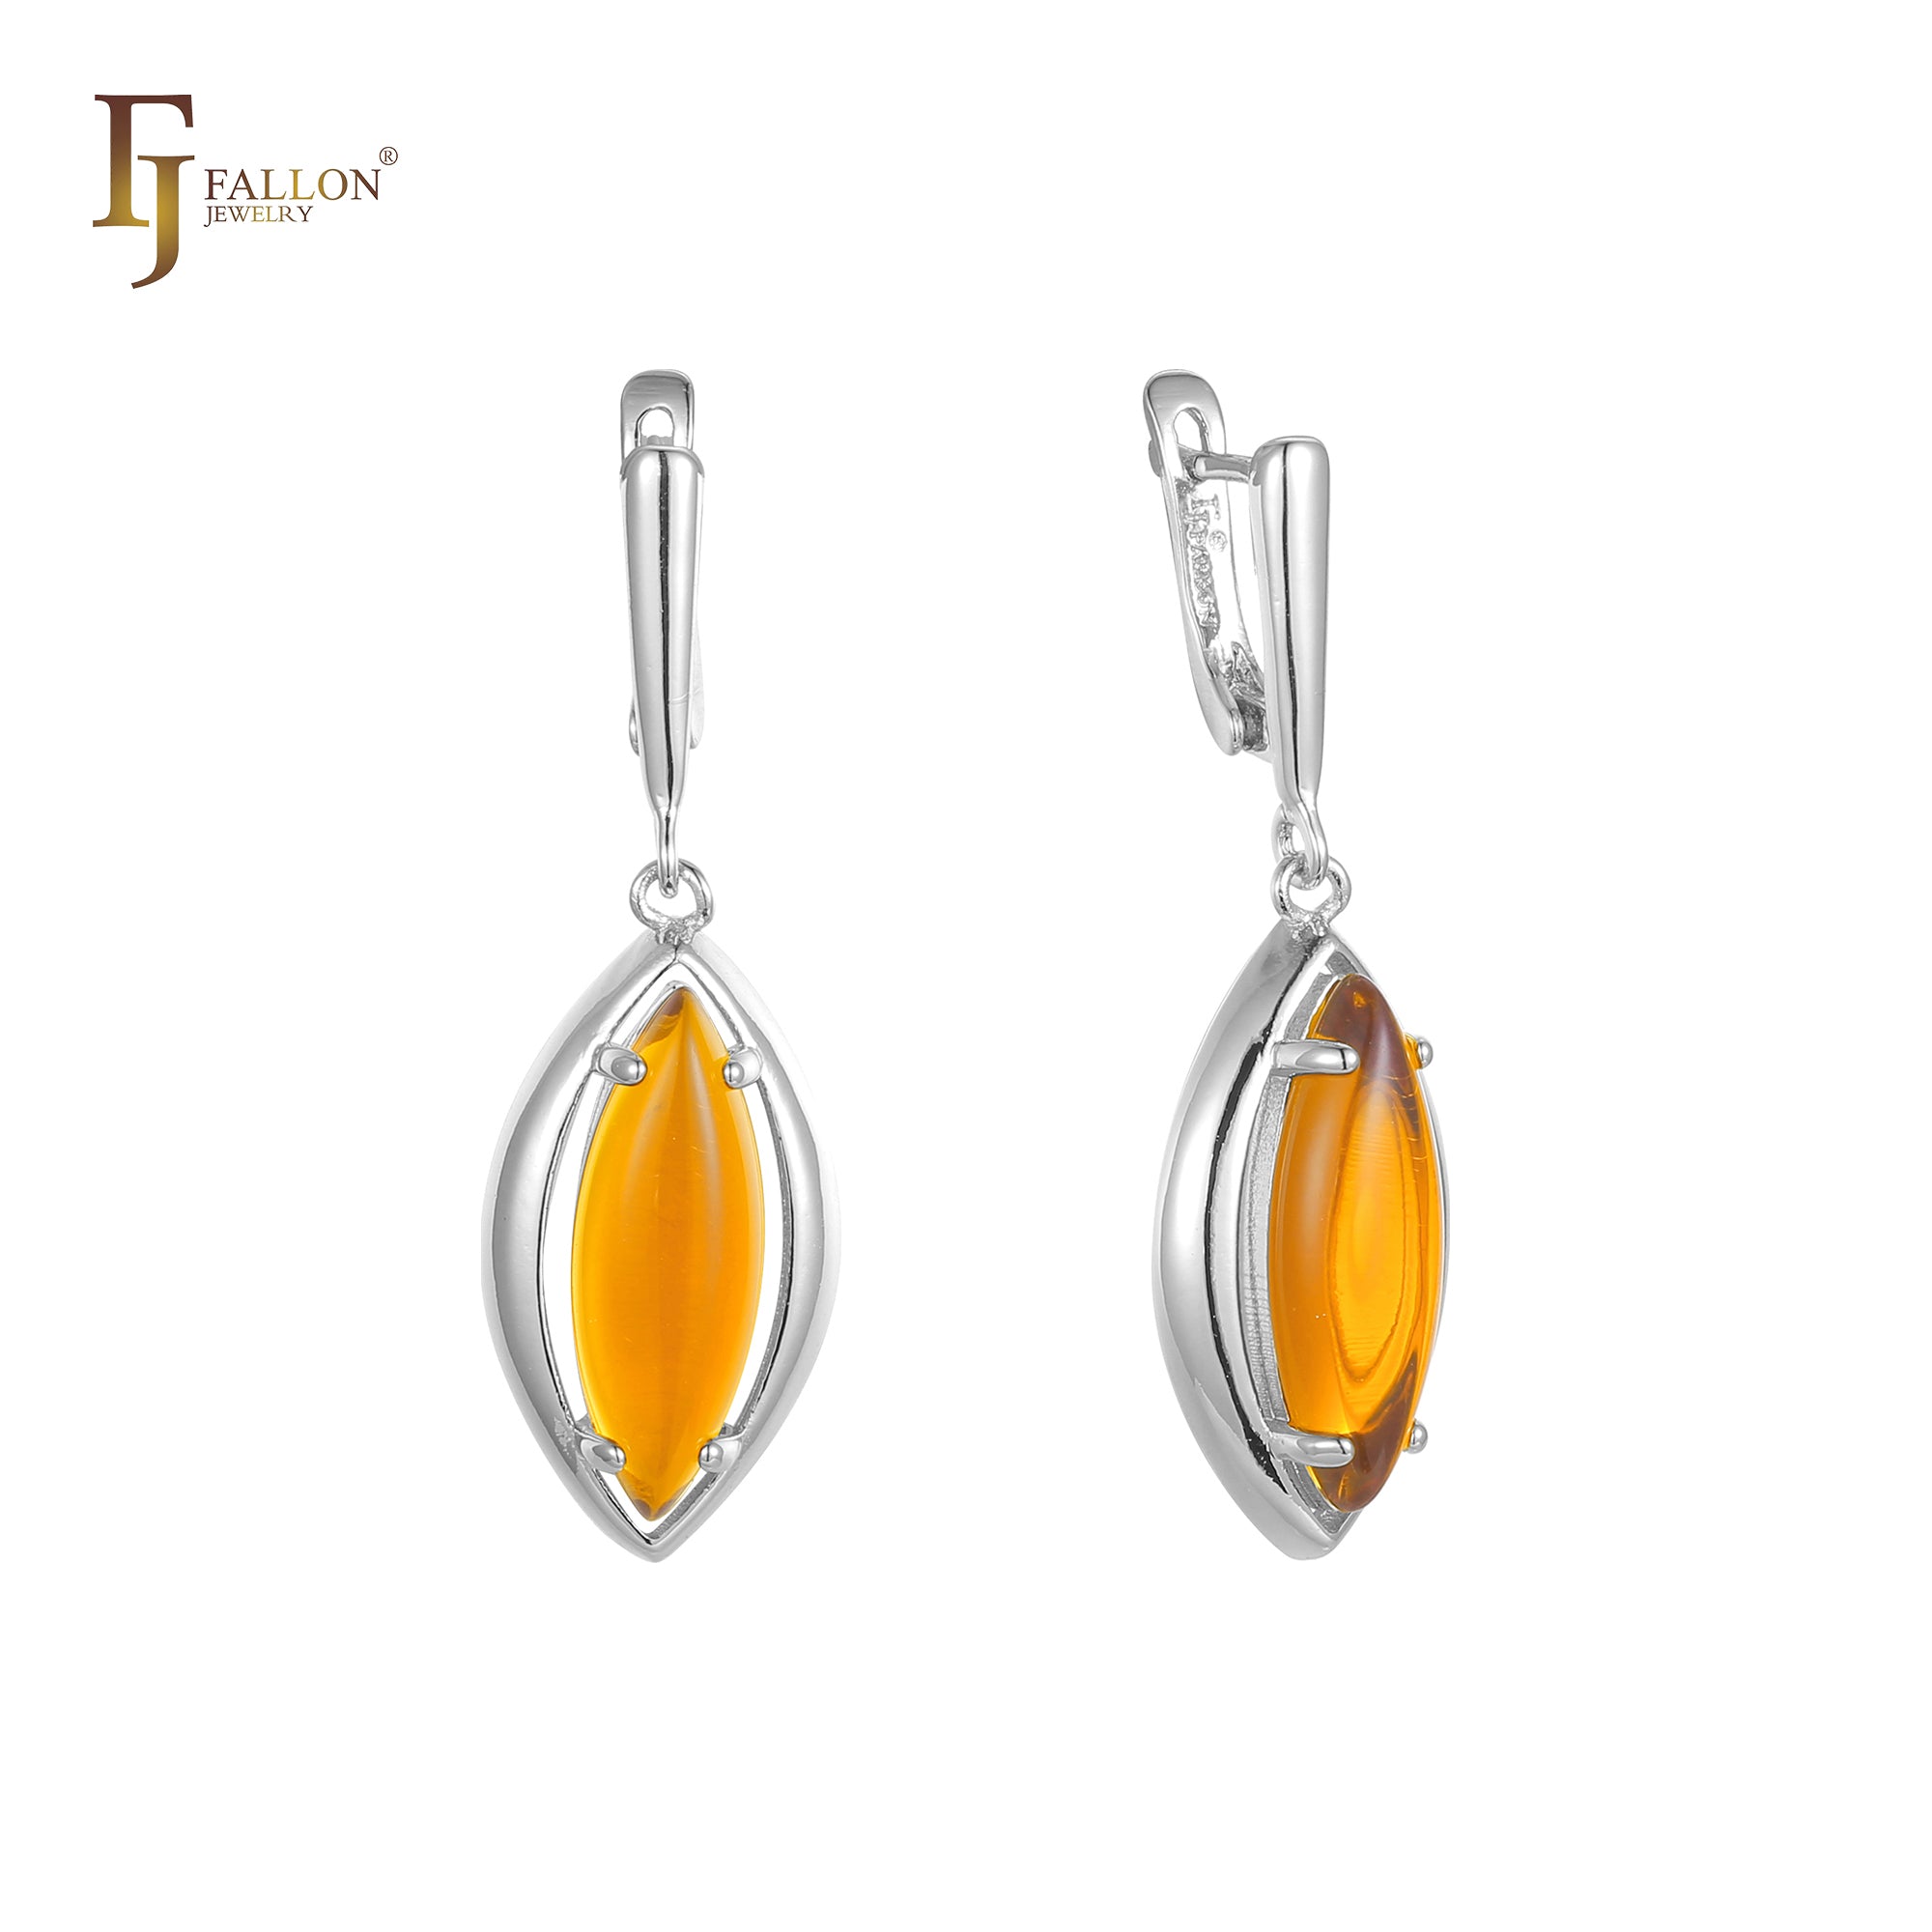 .Marquise big orange stone earrings plated in 14K Gold, Rose Gold